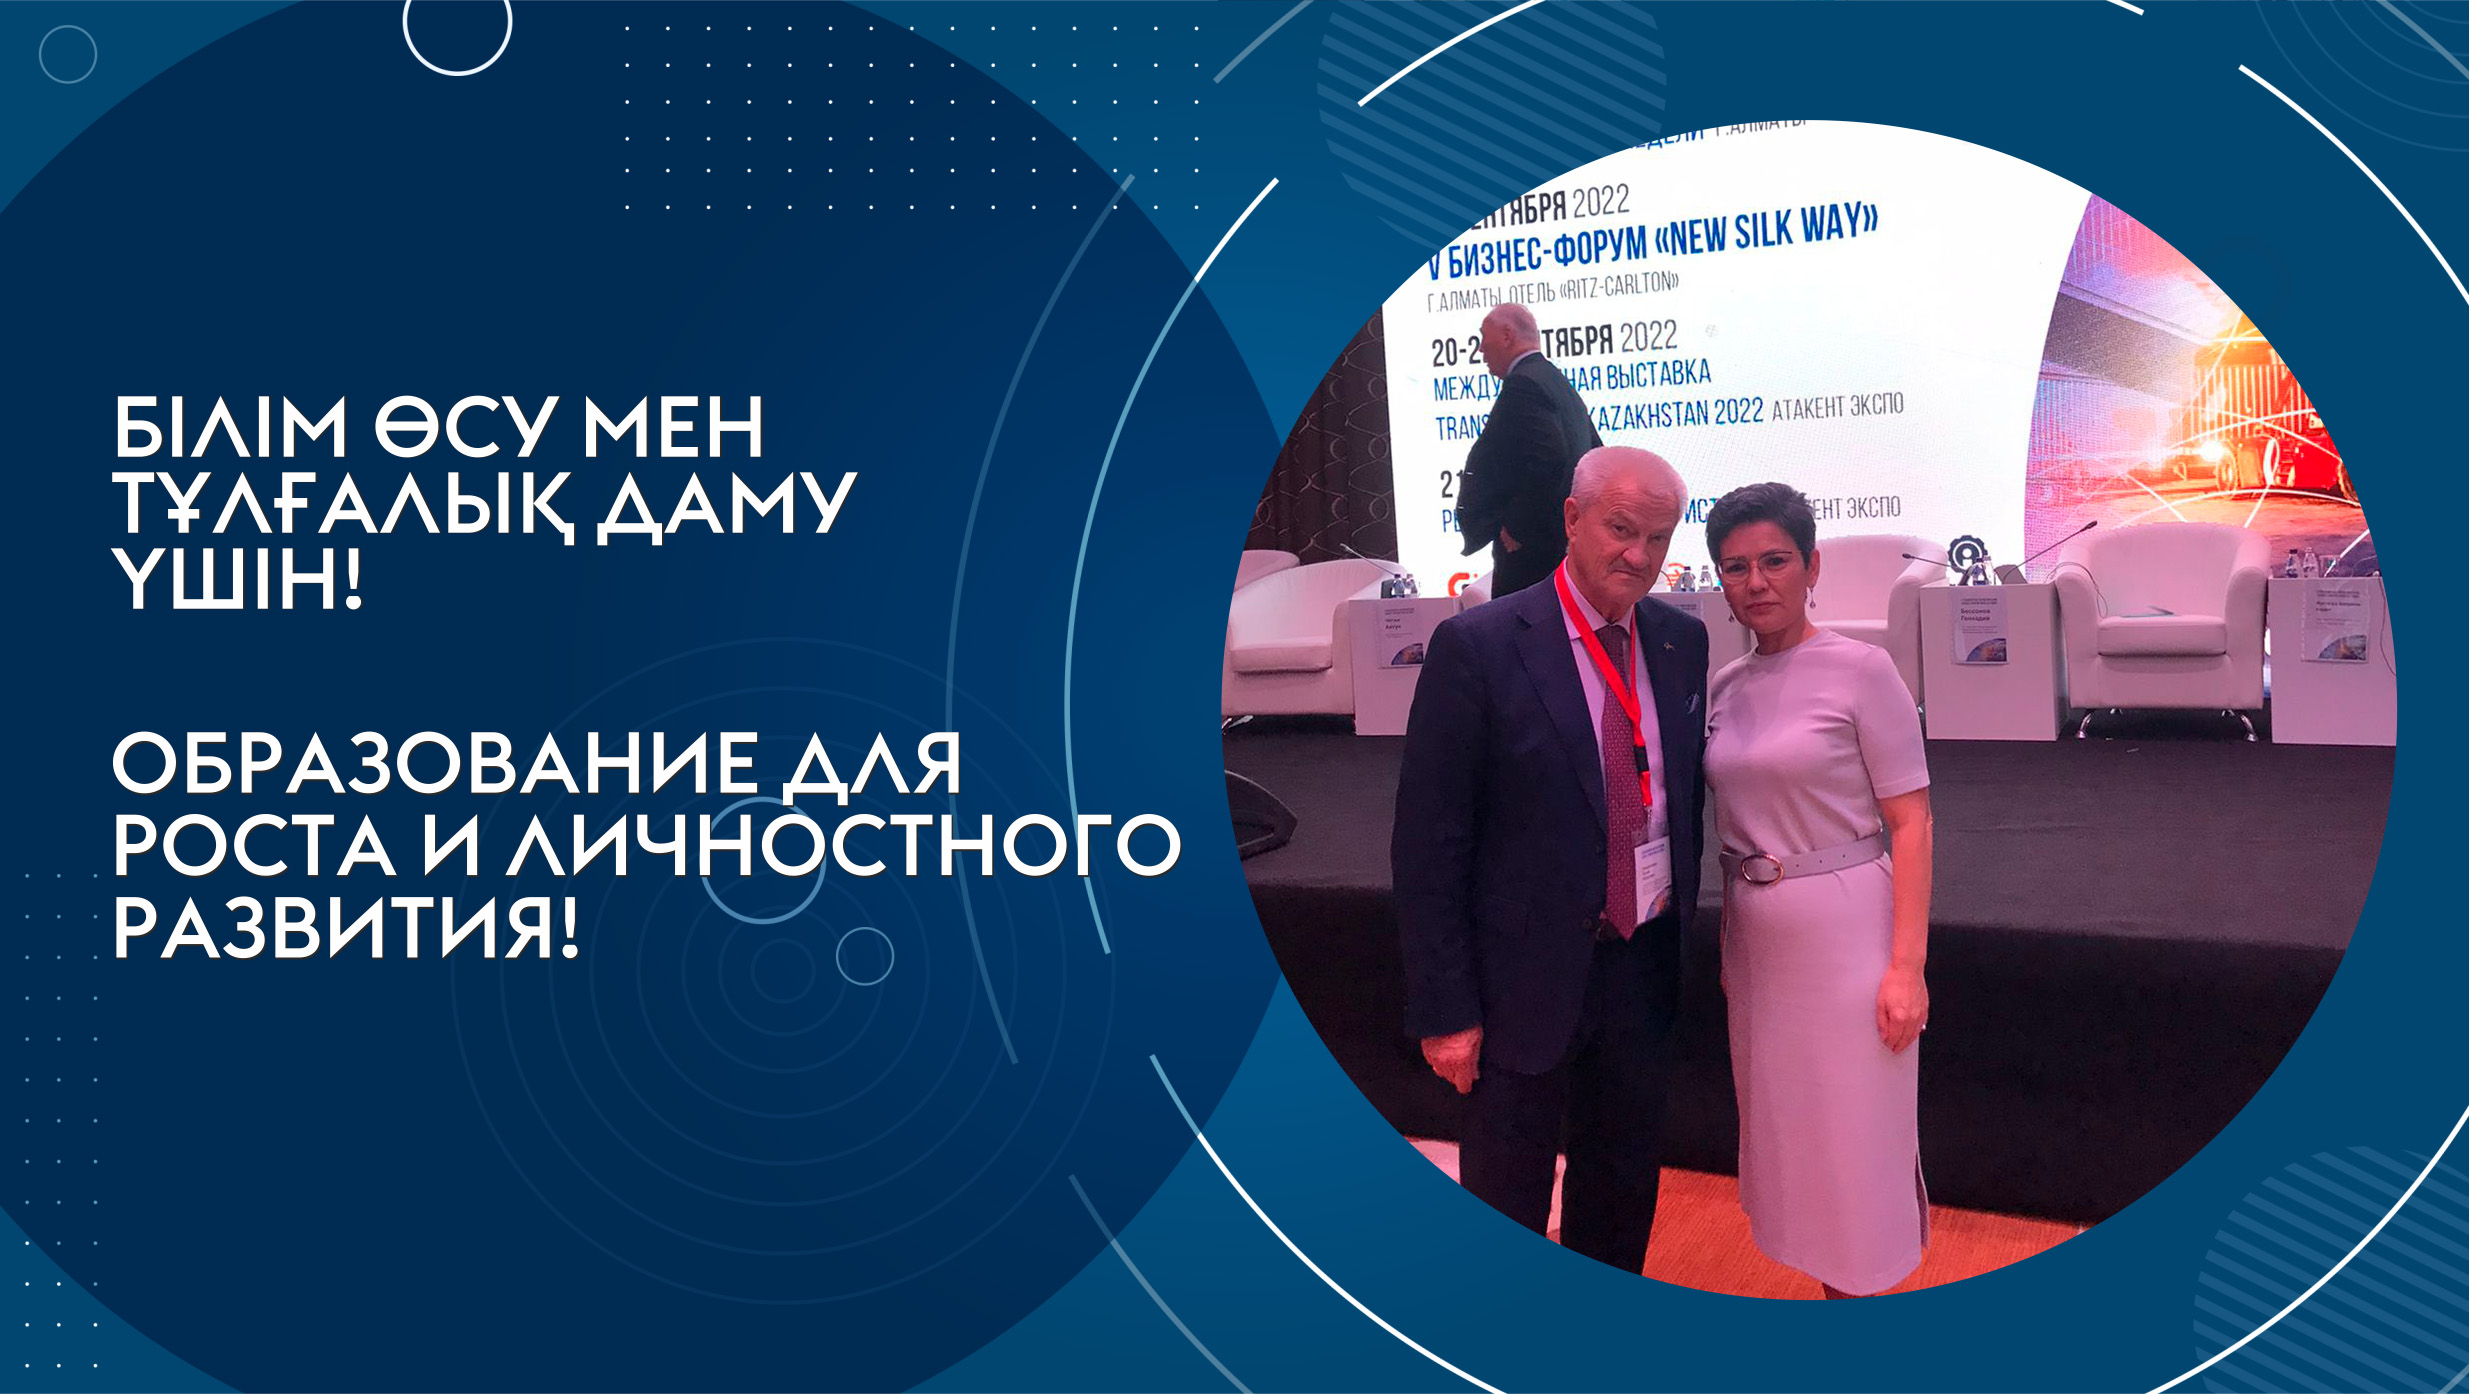 Days of the Transport Week of the Republic of Kazakhstan